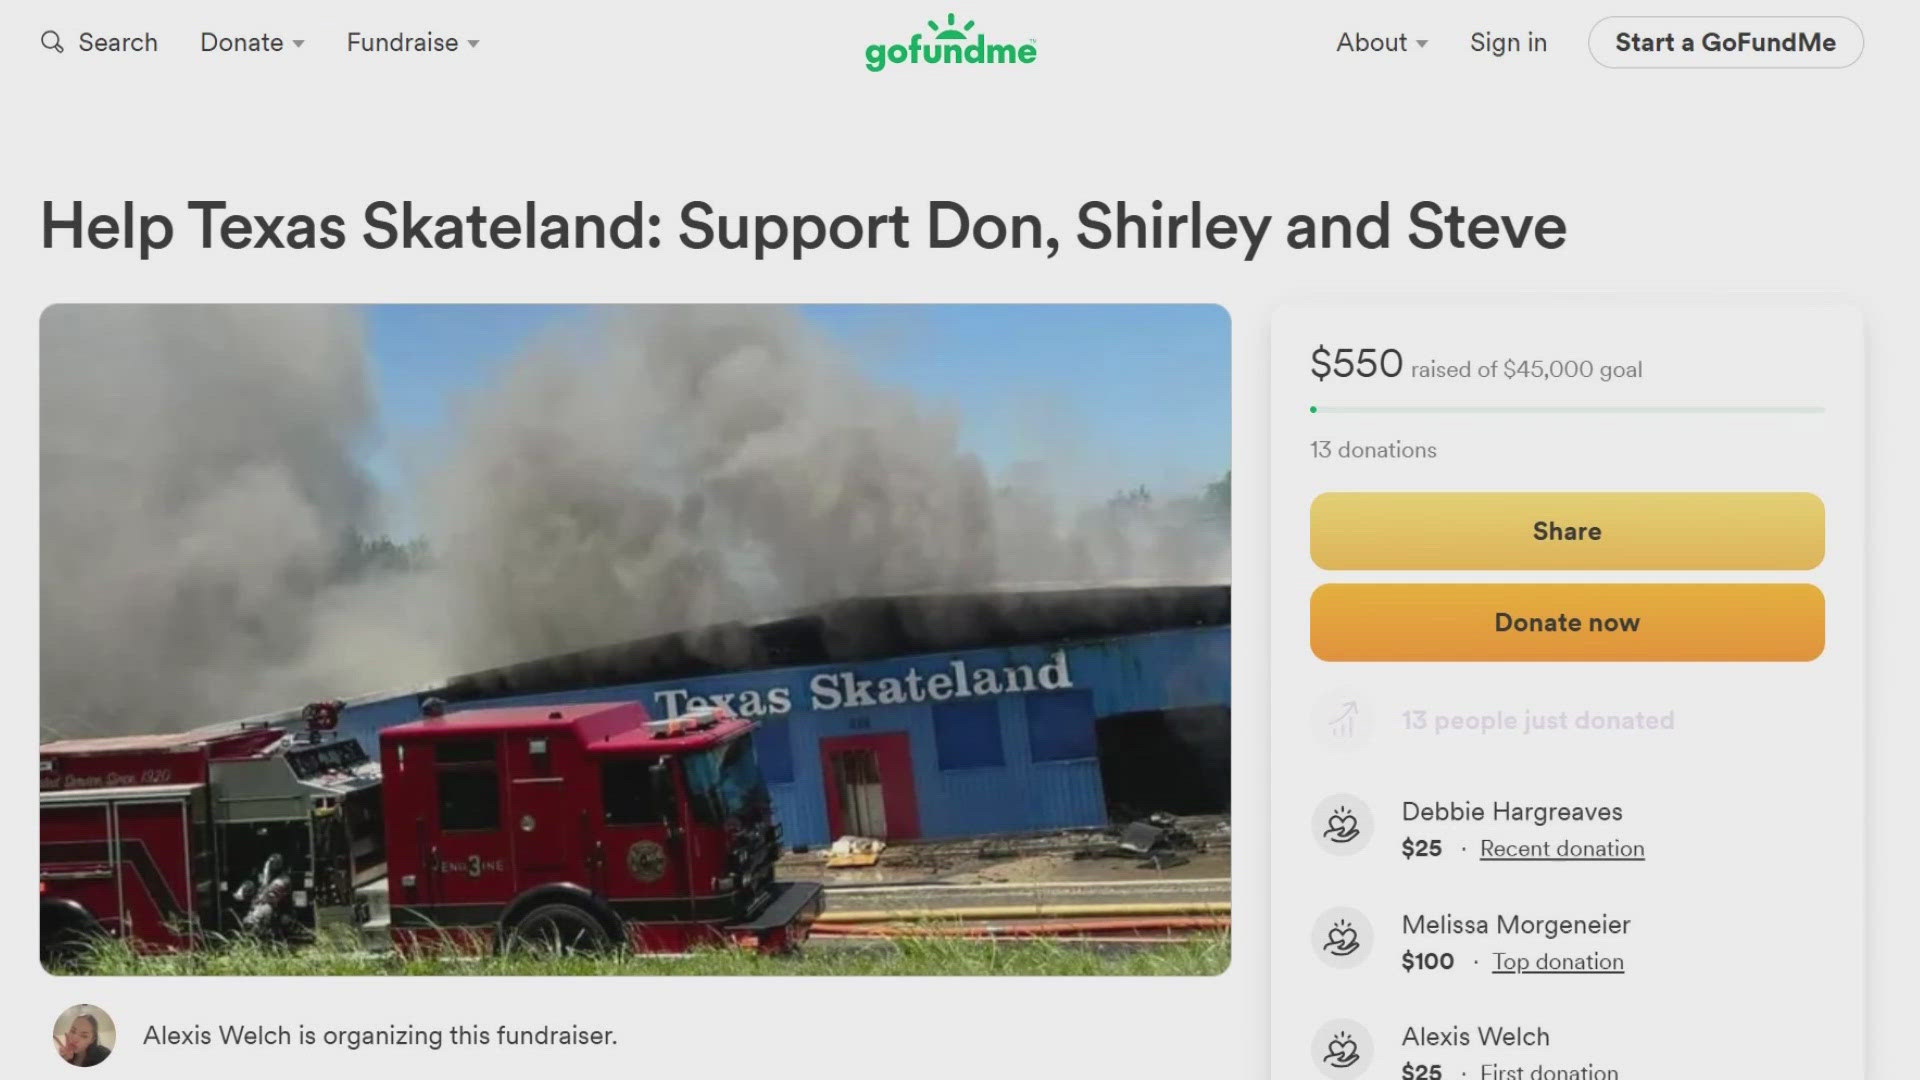 Many in Harker Heights are raising money after their childhood skating rink, Texas Skateland, was engulfed in flames on July 4.